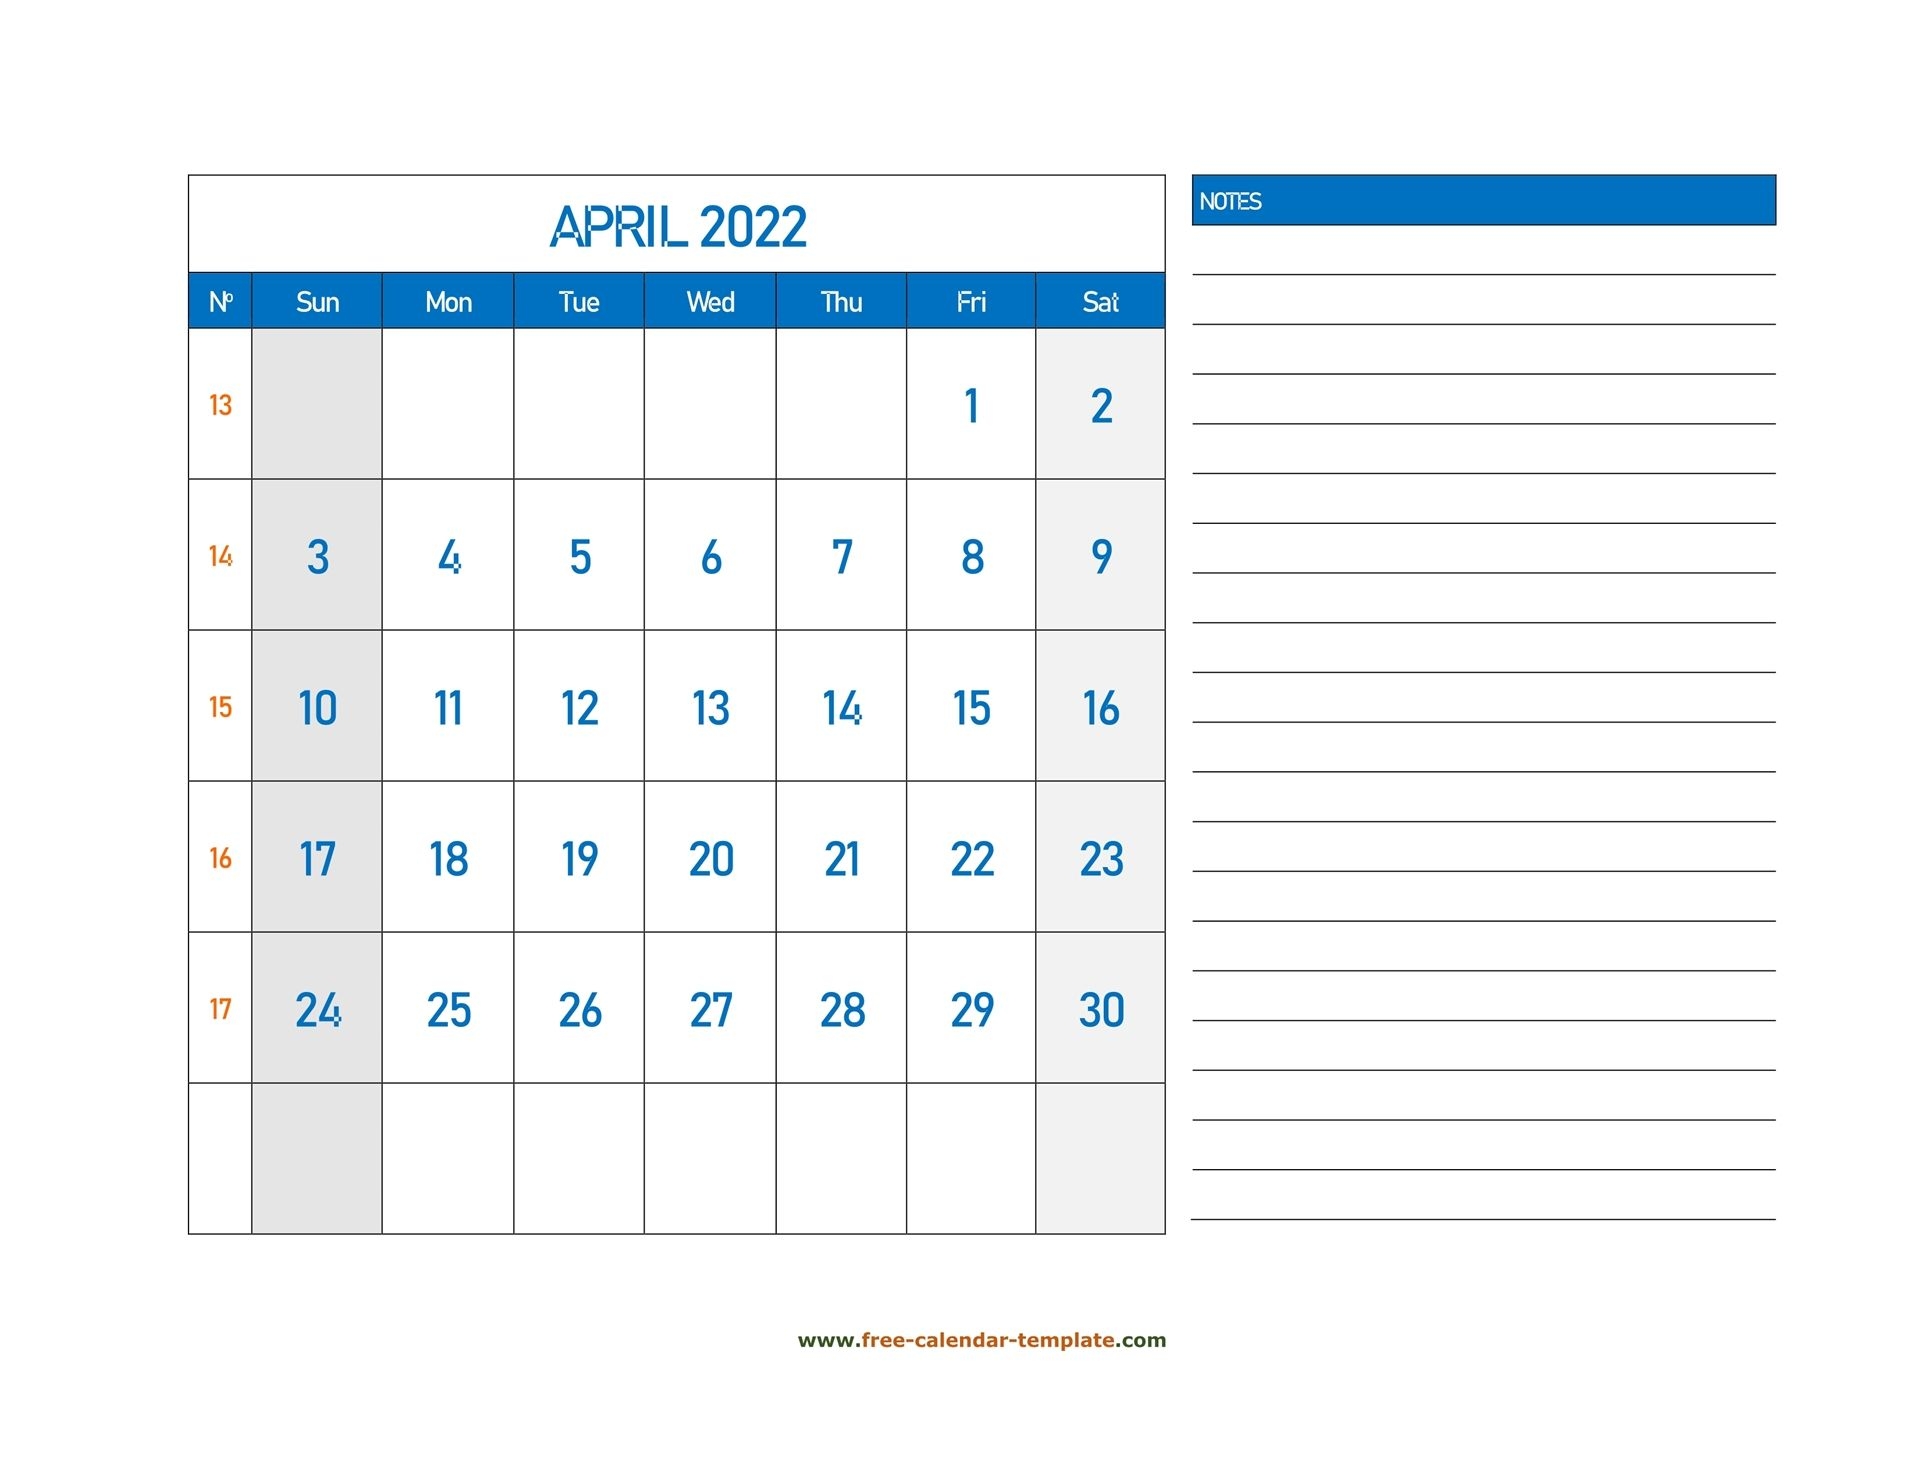 April Calendar 2022 Grid Lines For Holidays And Notes